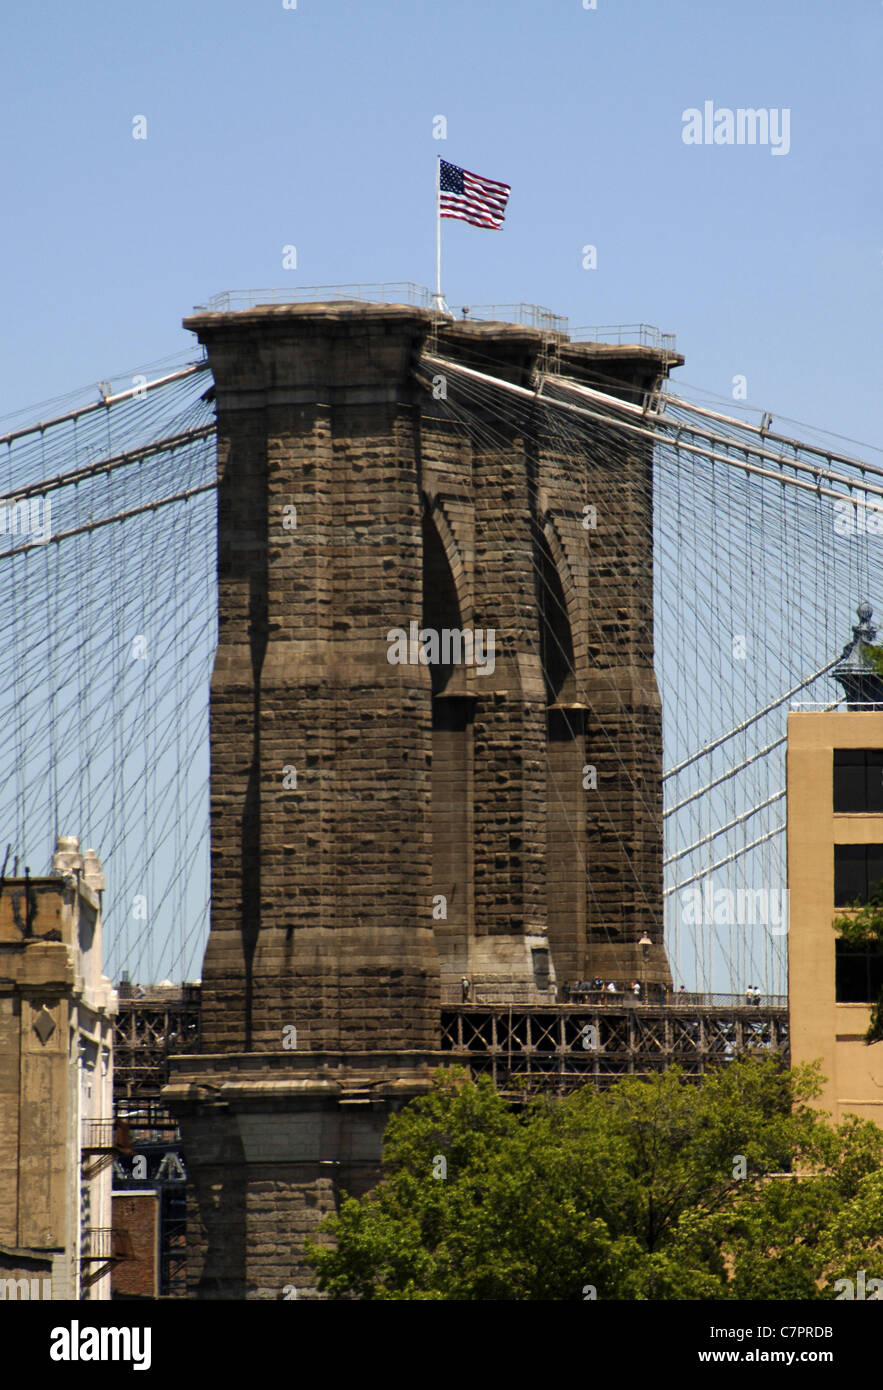 United States. New York. Brooklyn Bridge. Designed in the 19th century by J. A. Roebling. Detail. Stock Photo